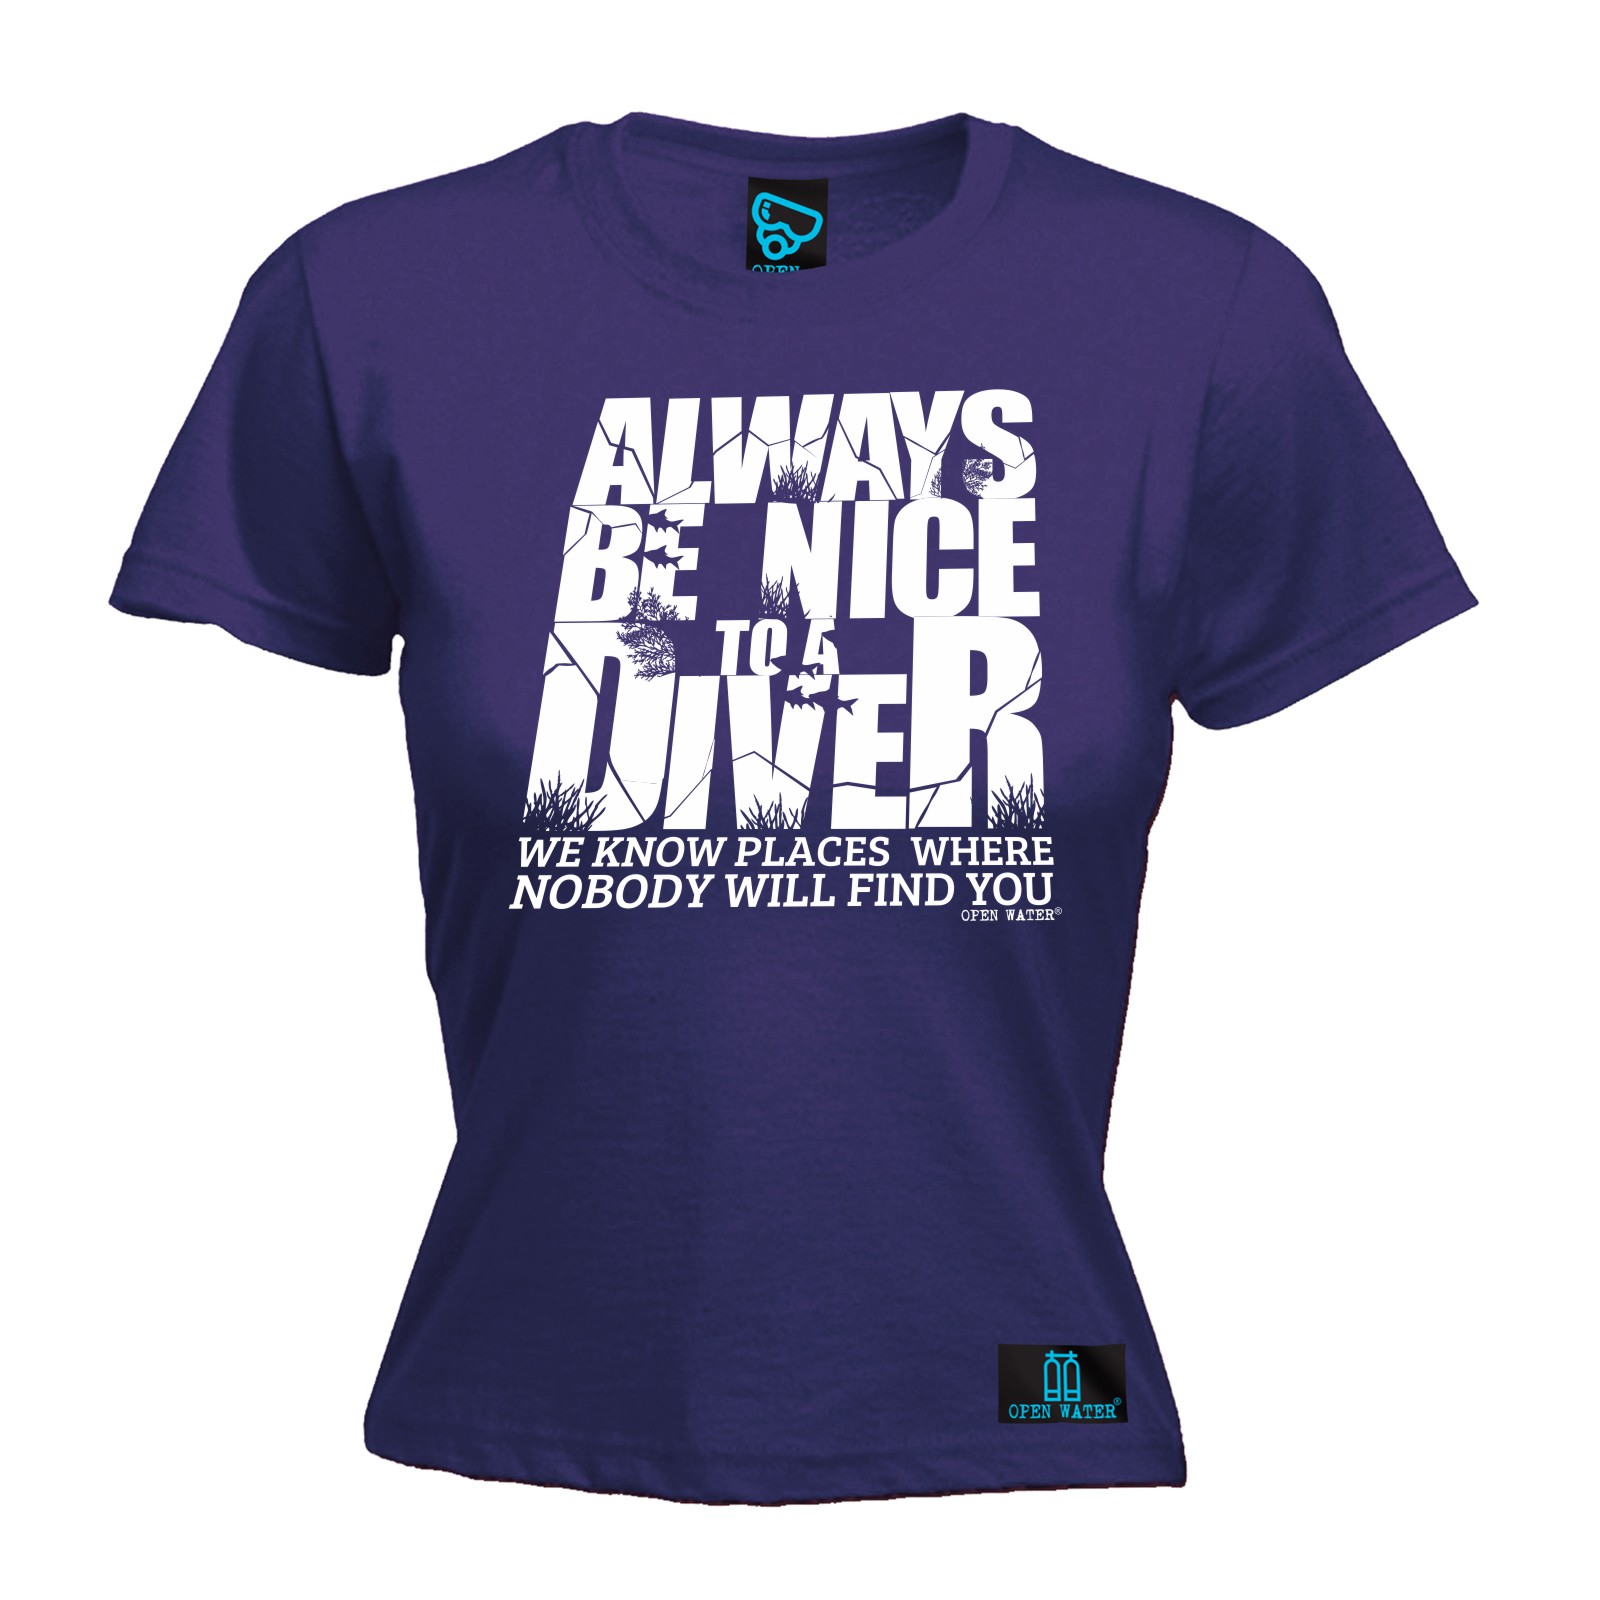 Ladies Diving Scuba Diving Because Punching People diver funny Birthday T-SHIRT 